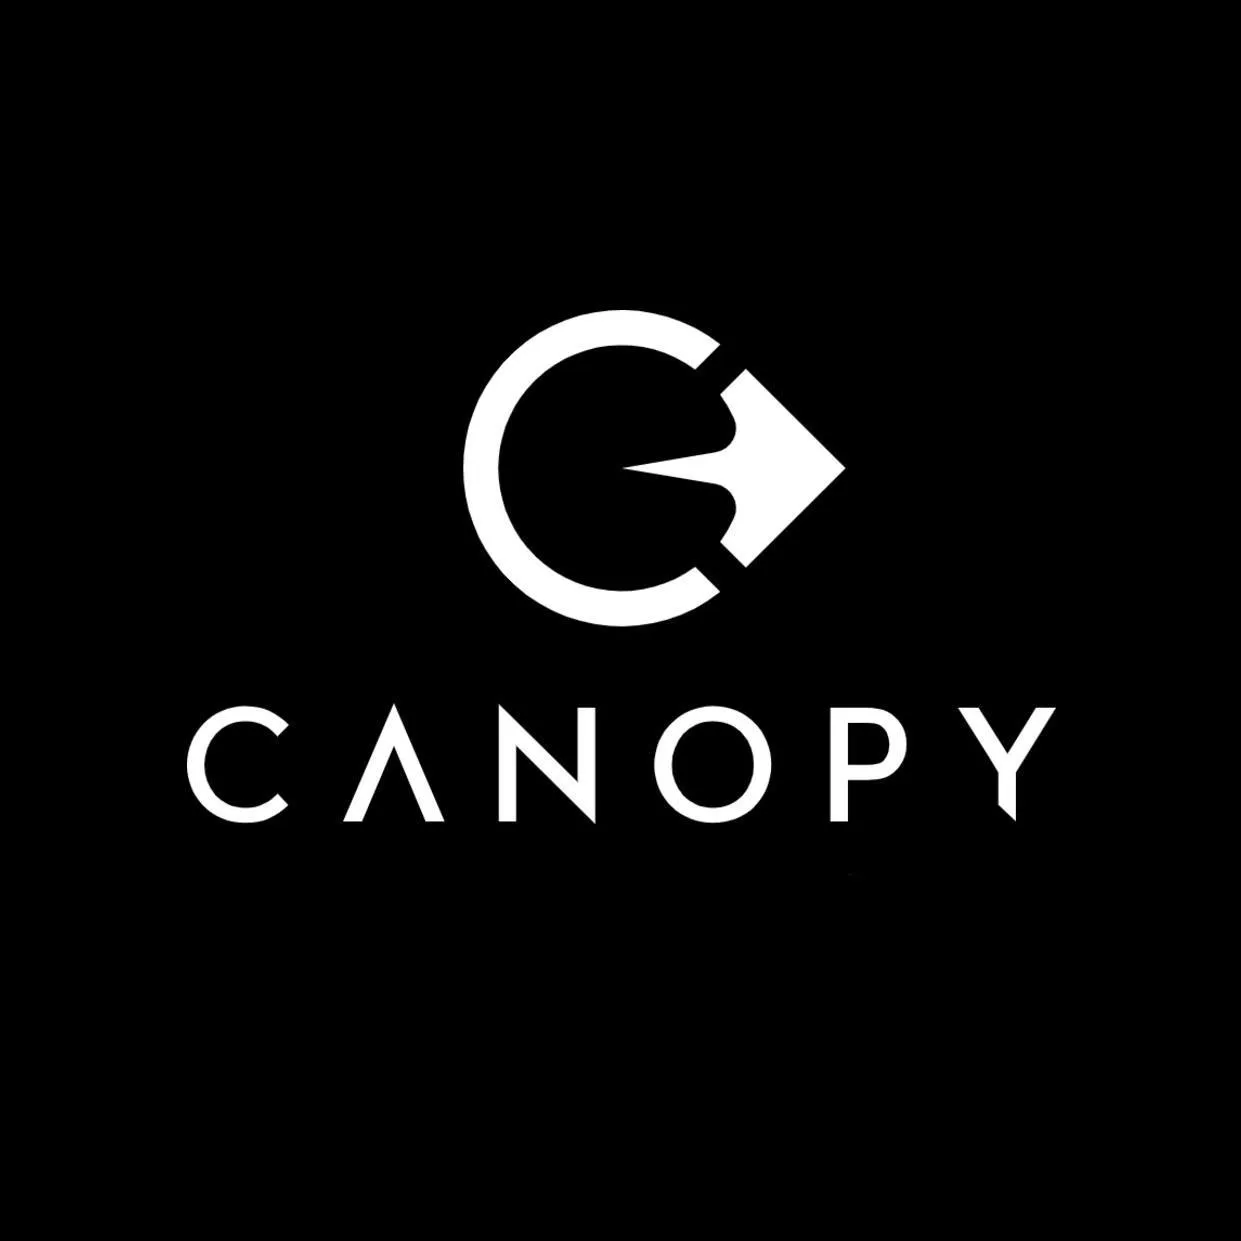  Canopy Watch promotions